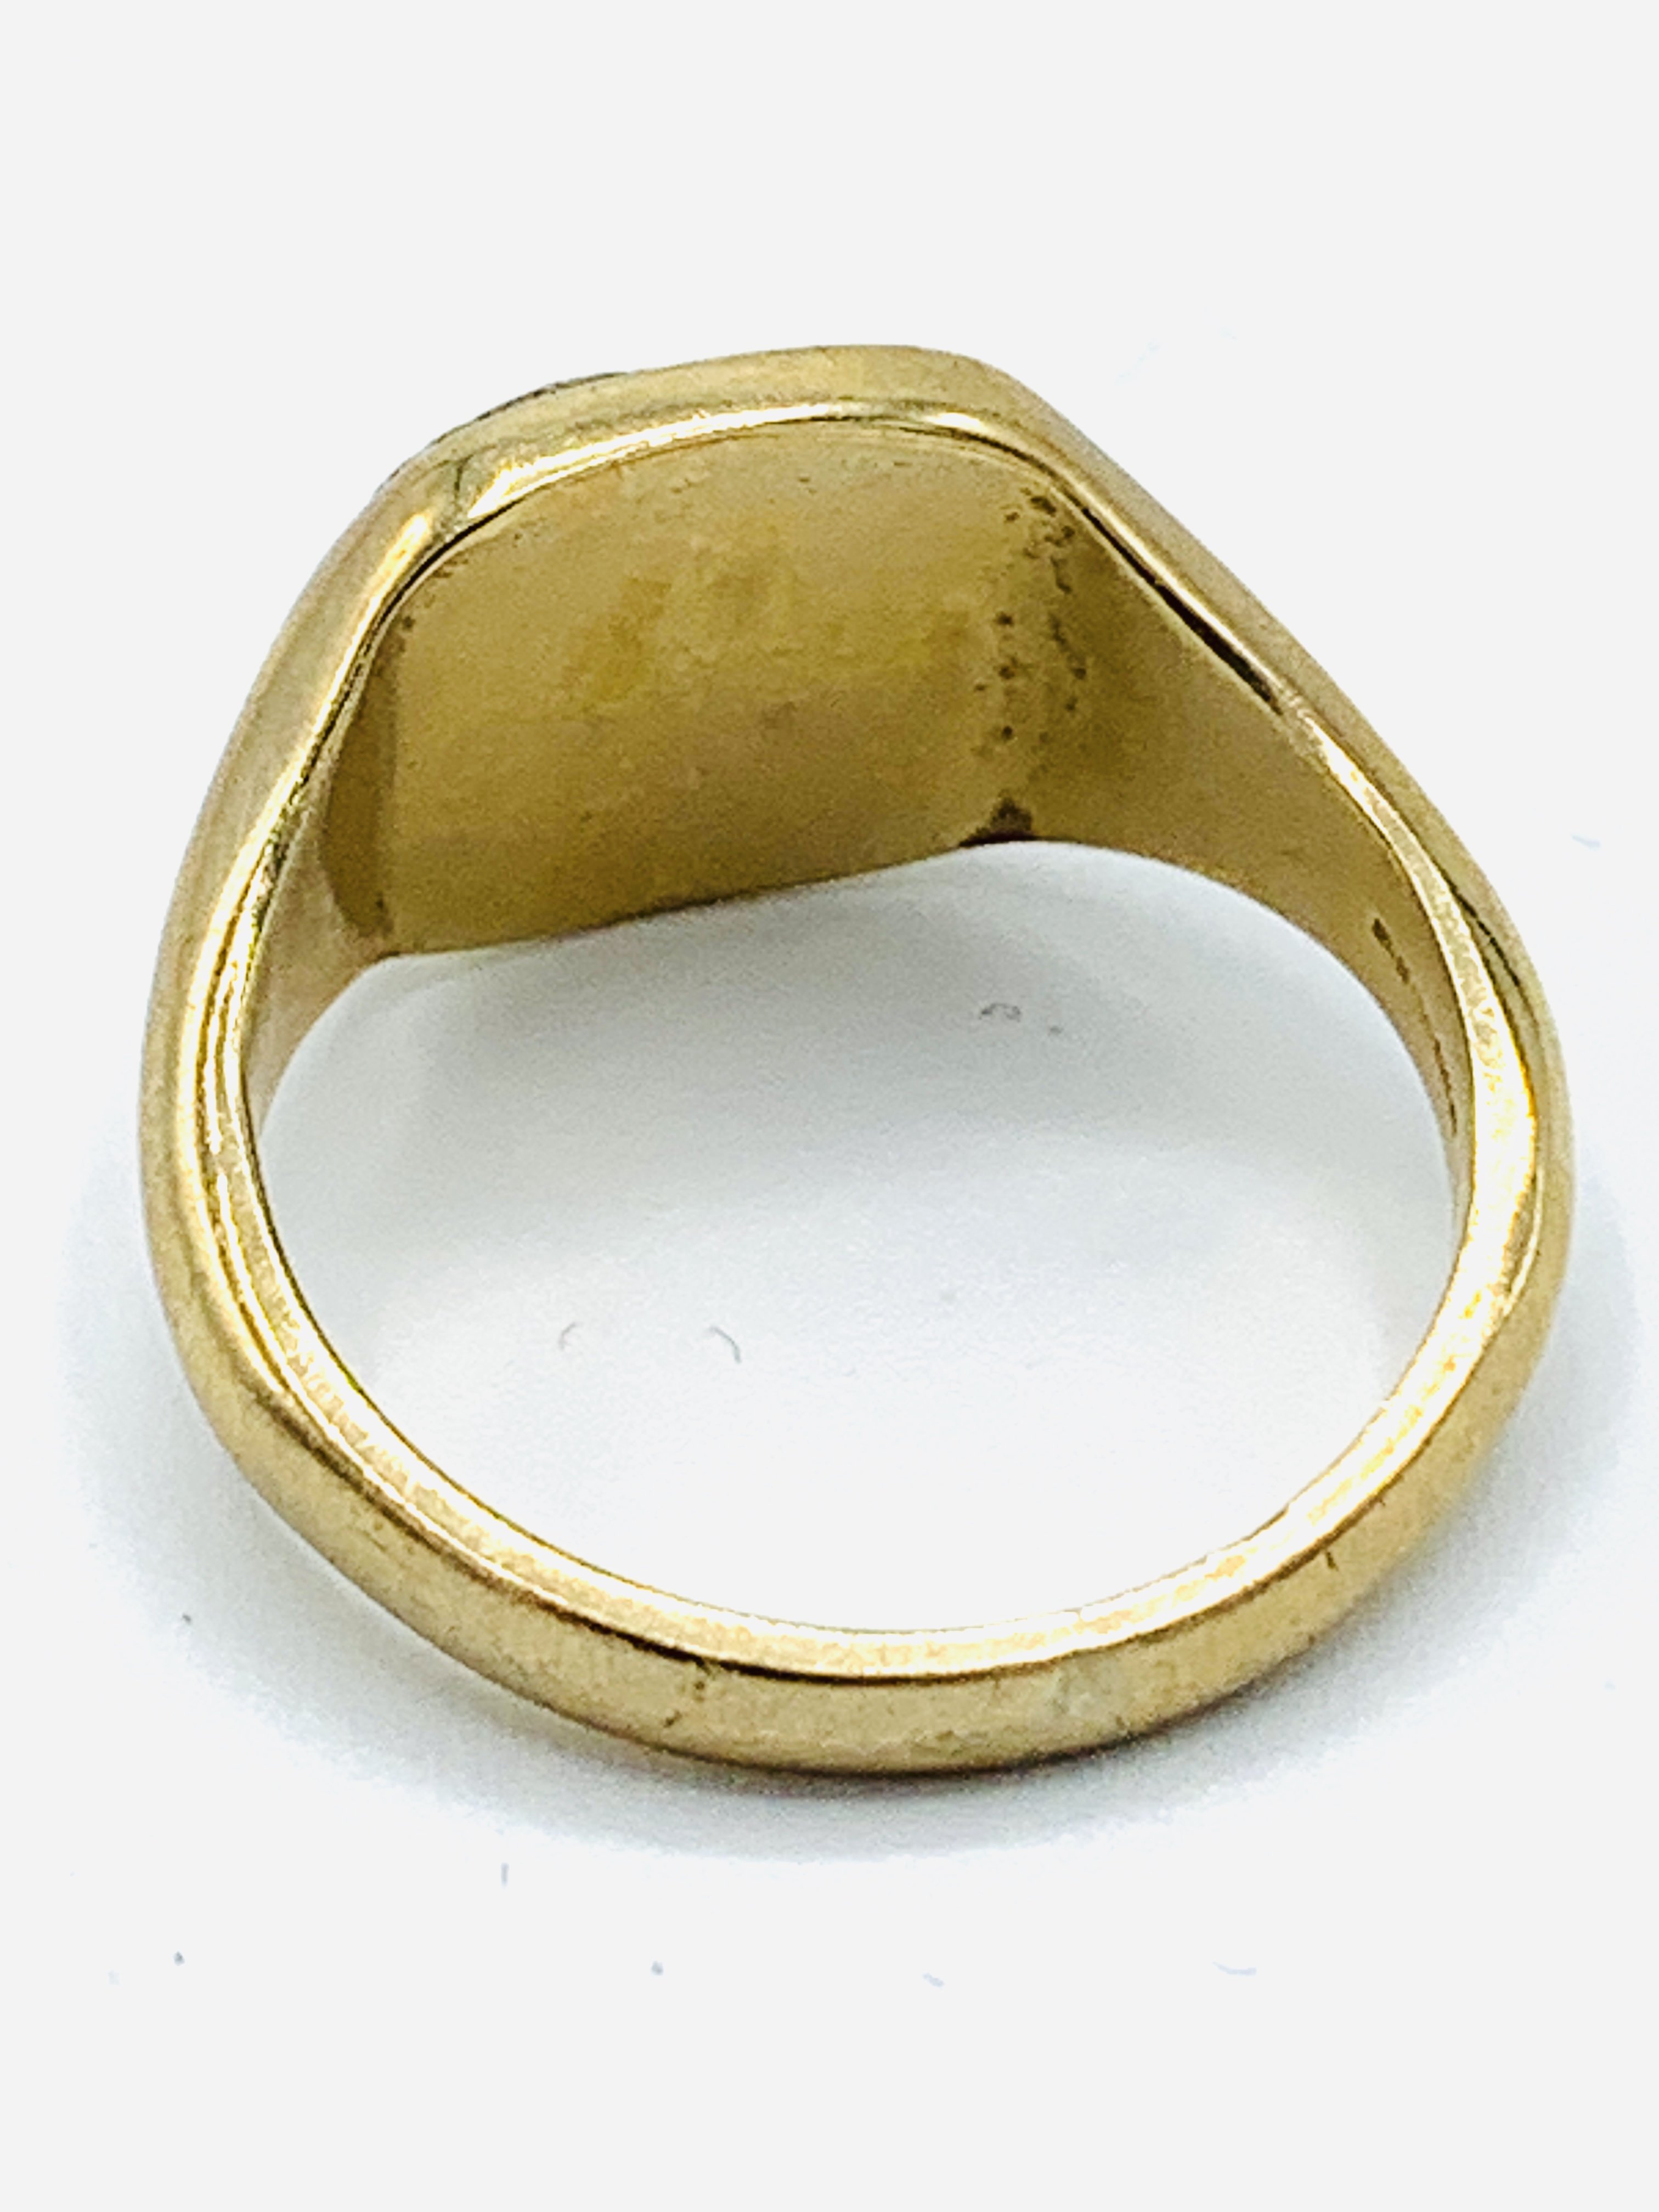 9ct gold signet ring, and a silver wedding band - Image 4 of 8